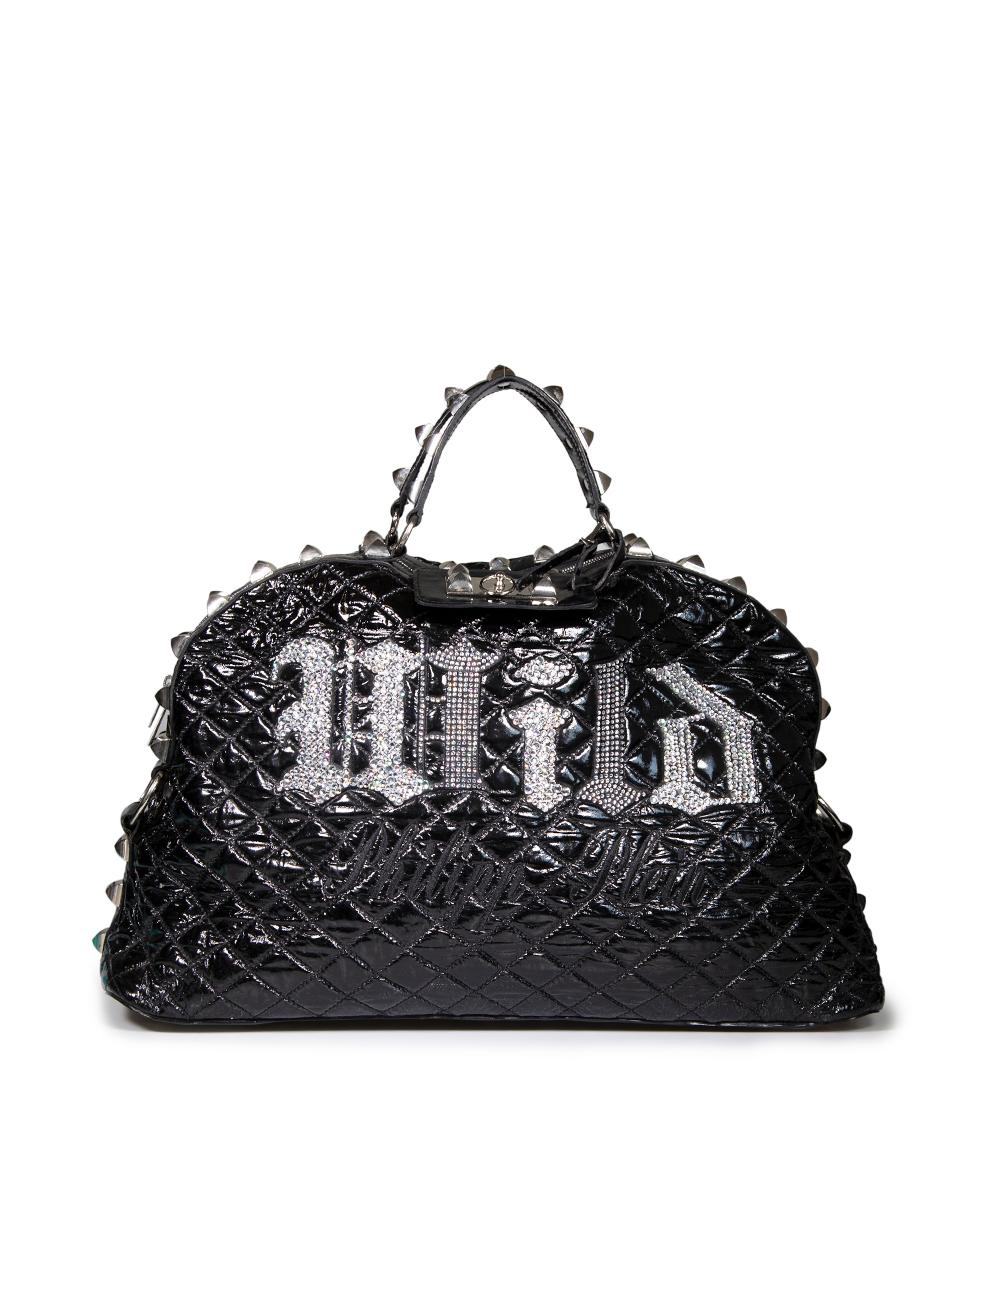 Philipp Plein Black Wild Crystal Embellished Weekender In Good Condition For Sale In London, GB